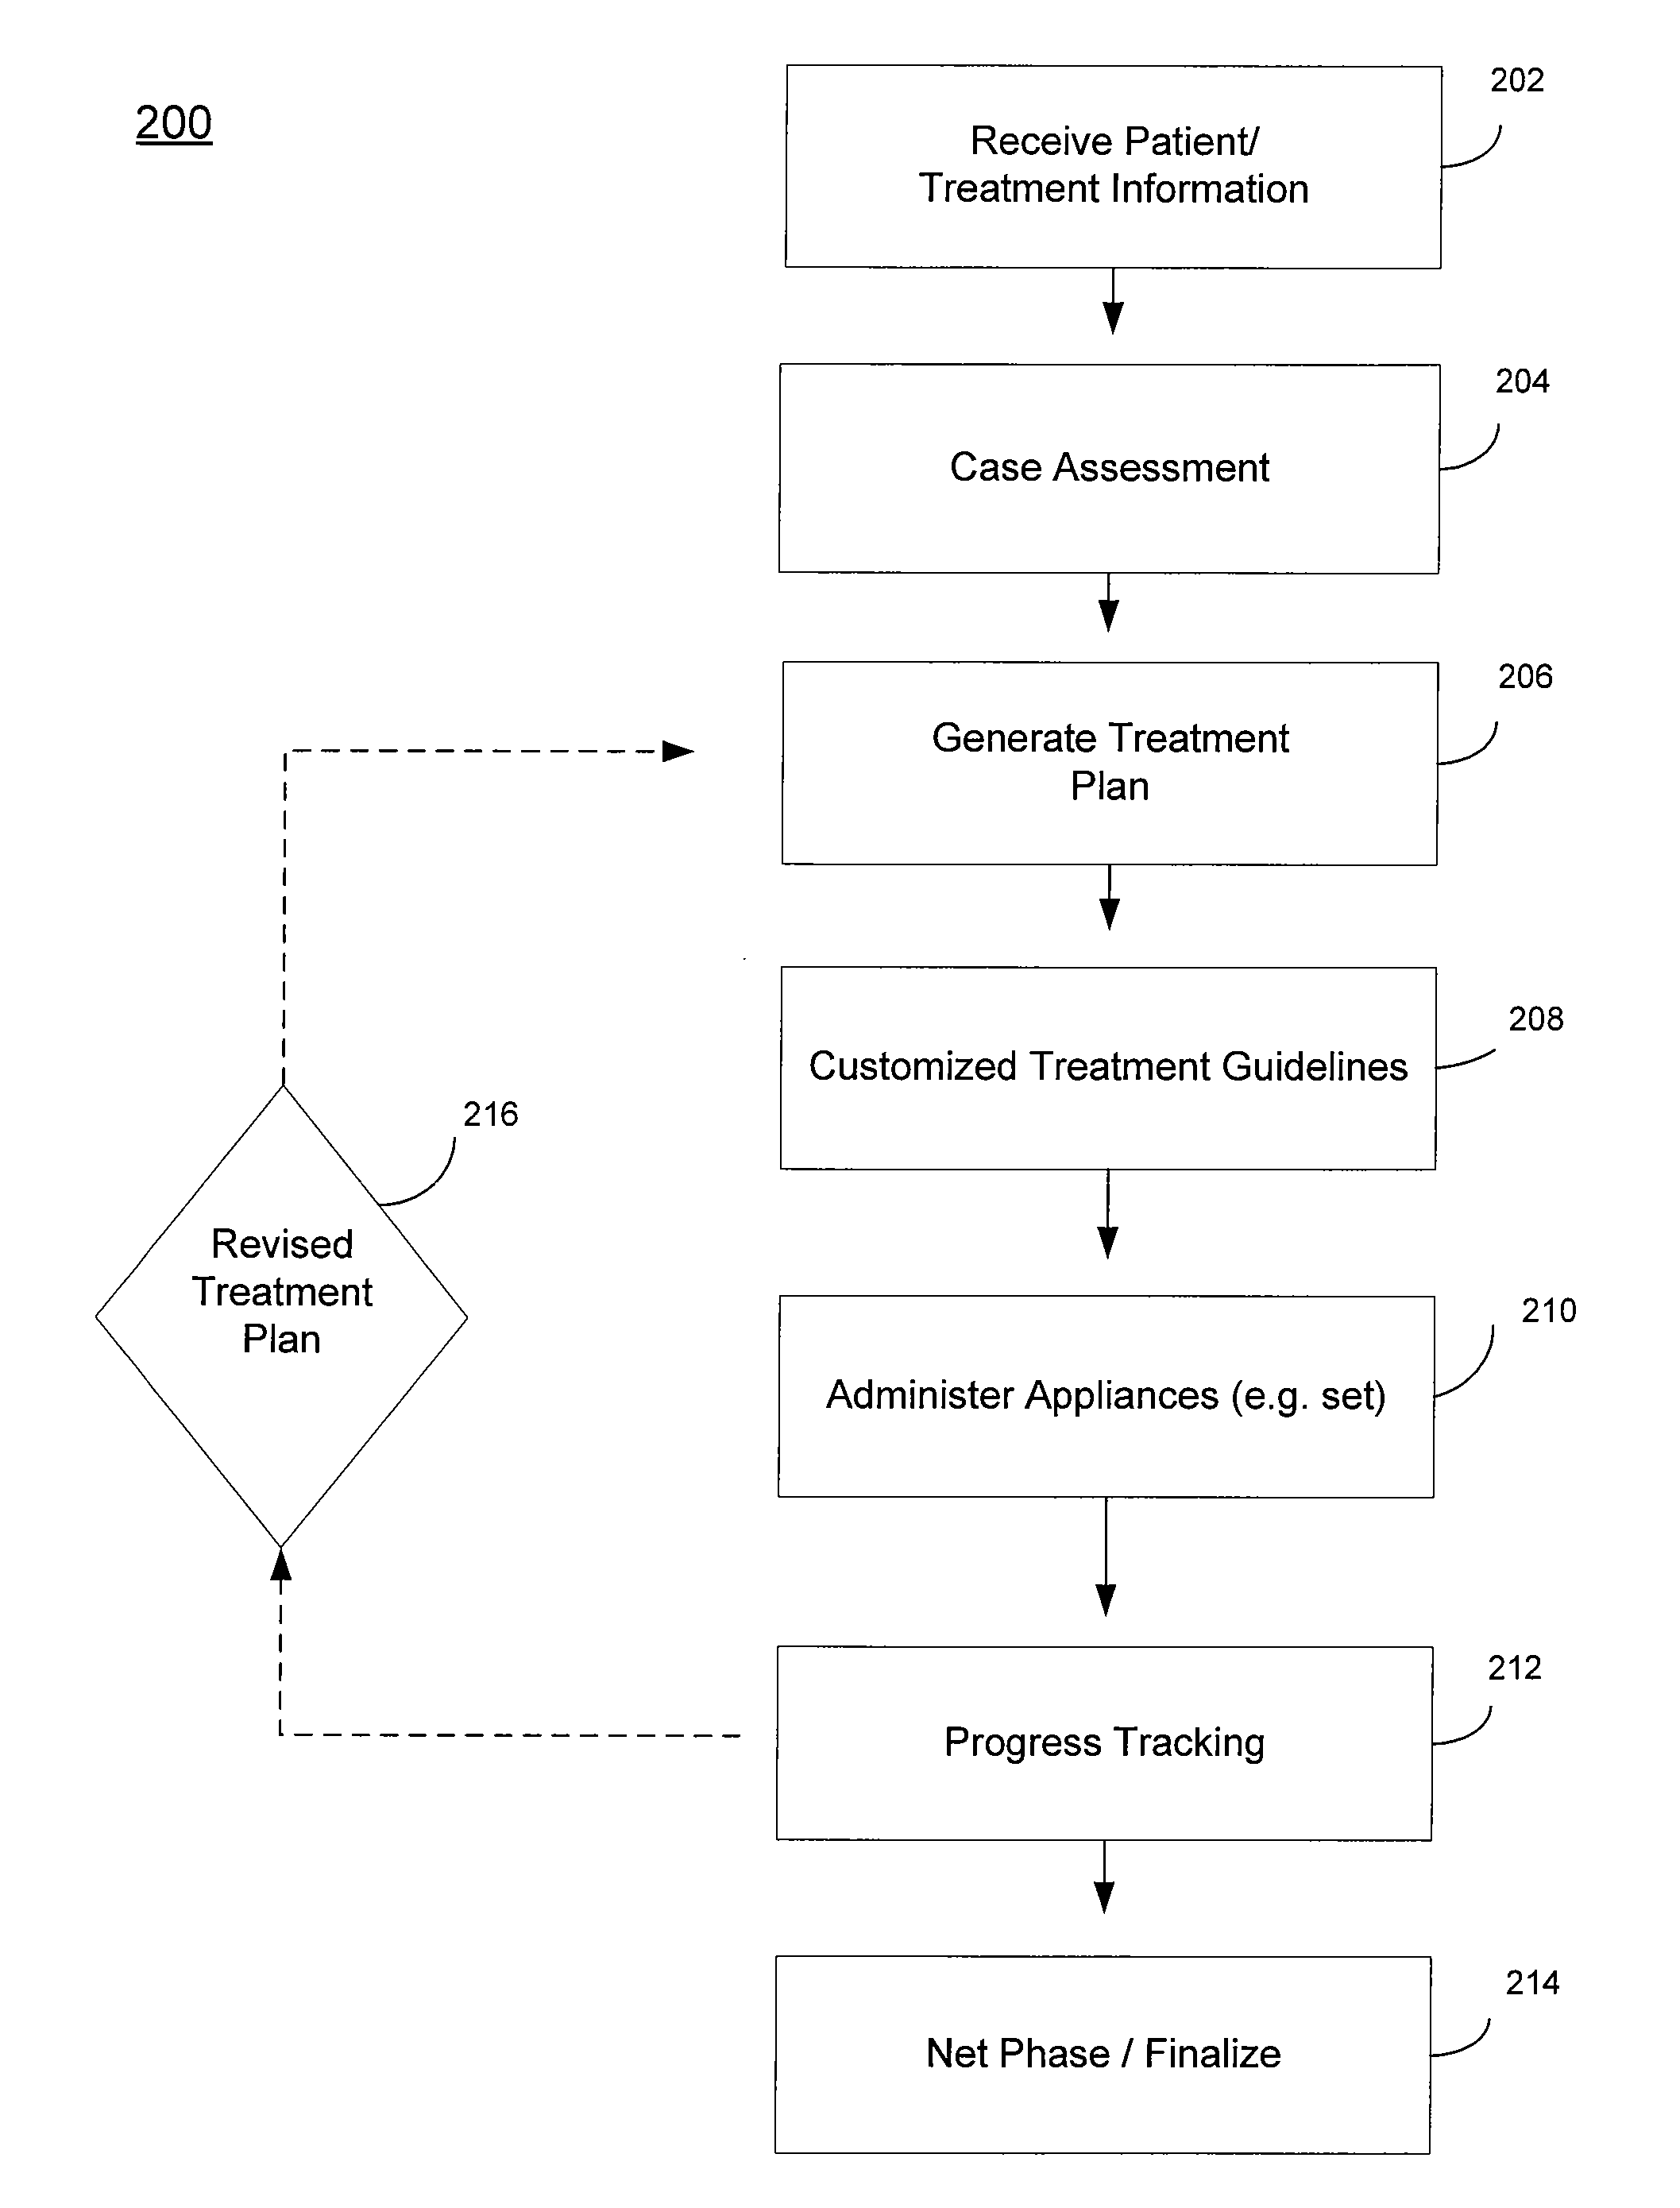 Treatment planning and progress tracking systems and methods